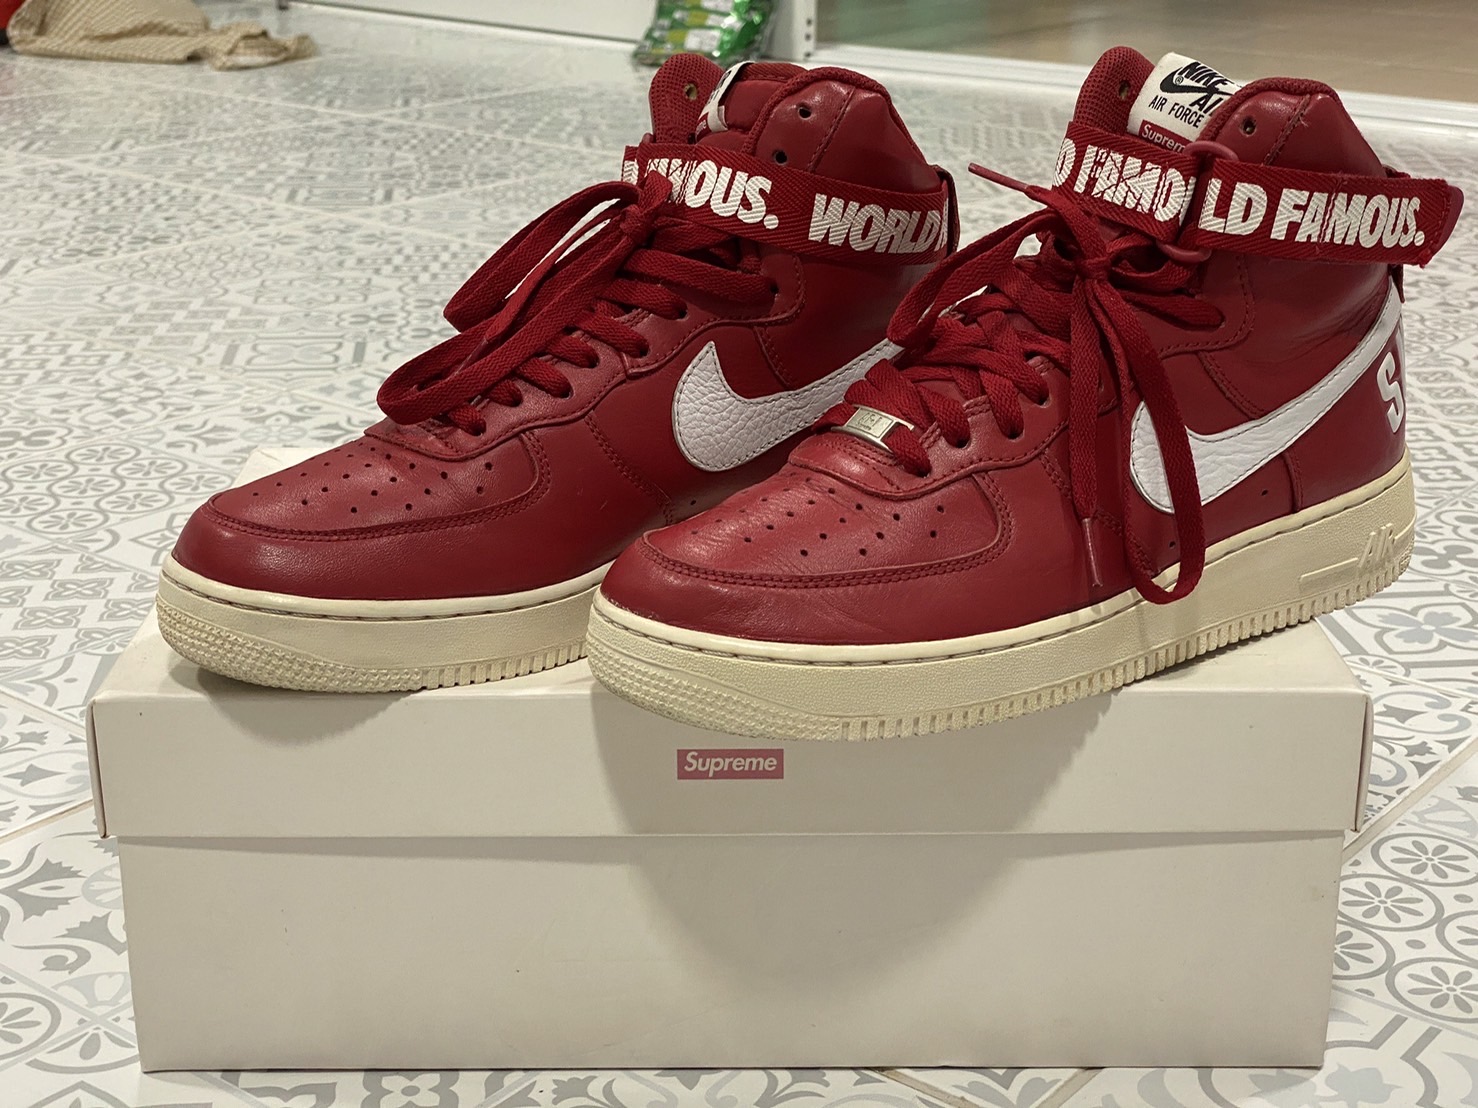 Nike Air Force 1 High Supreme World Famous Red Men's - 698696-610 - US